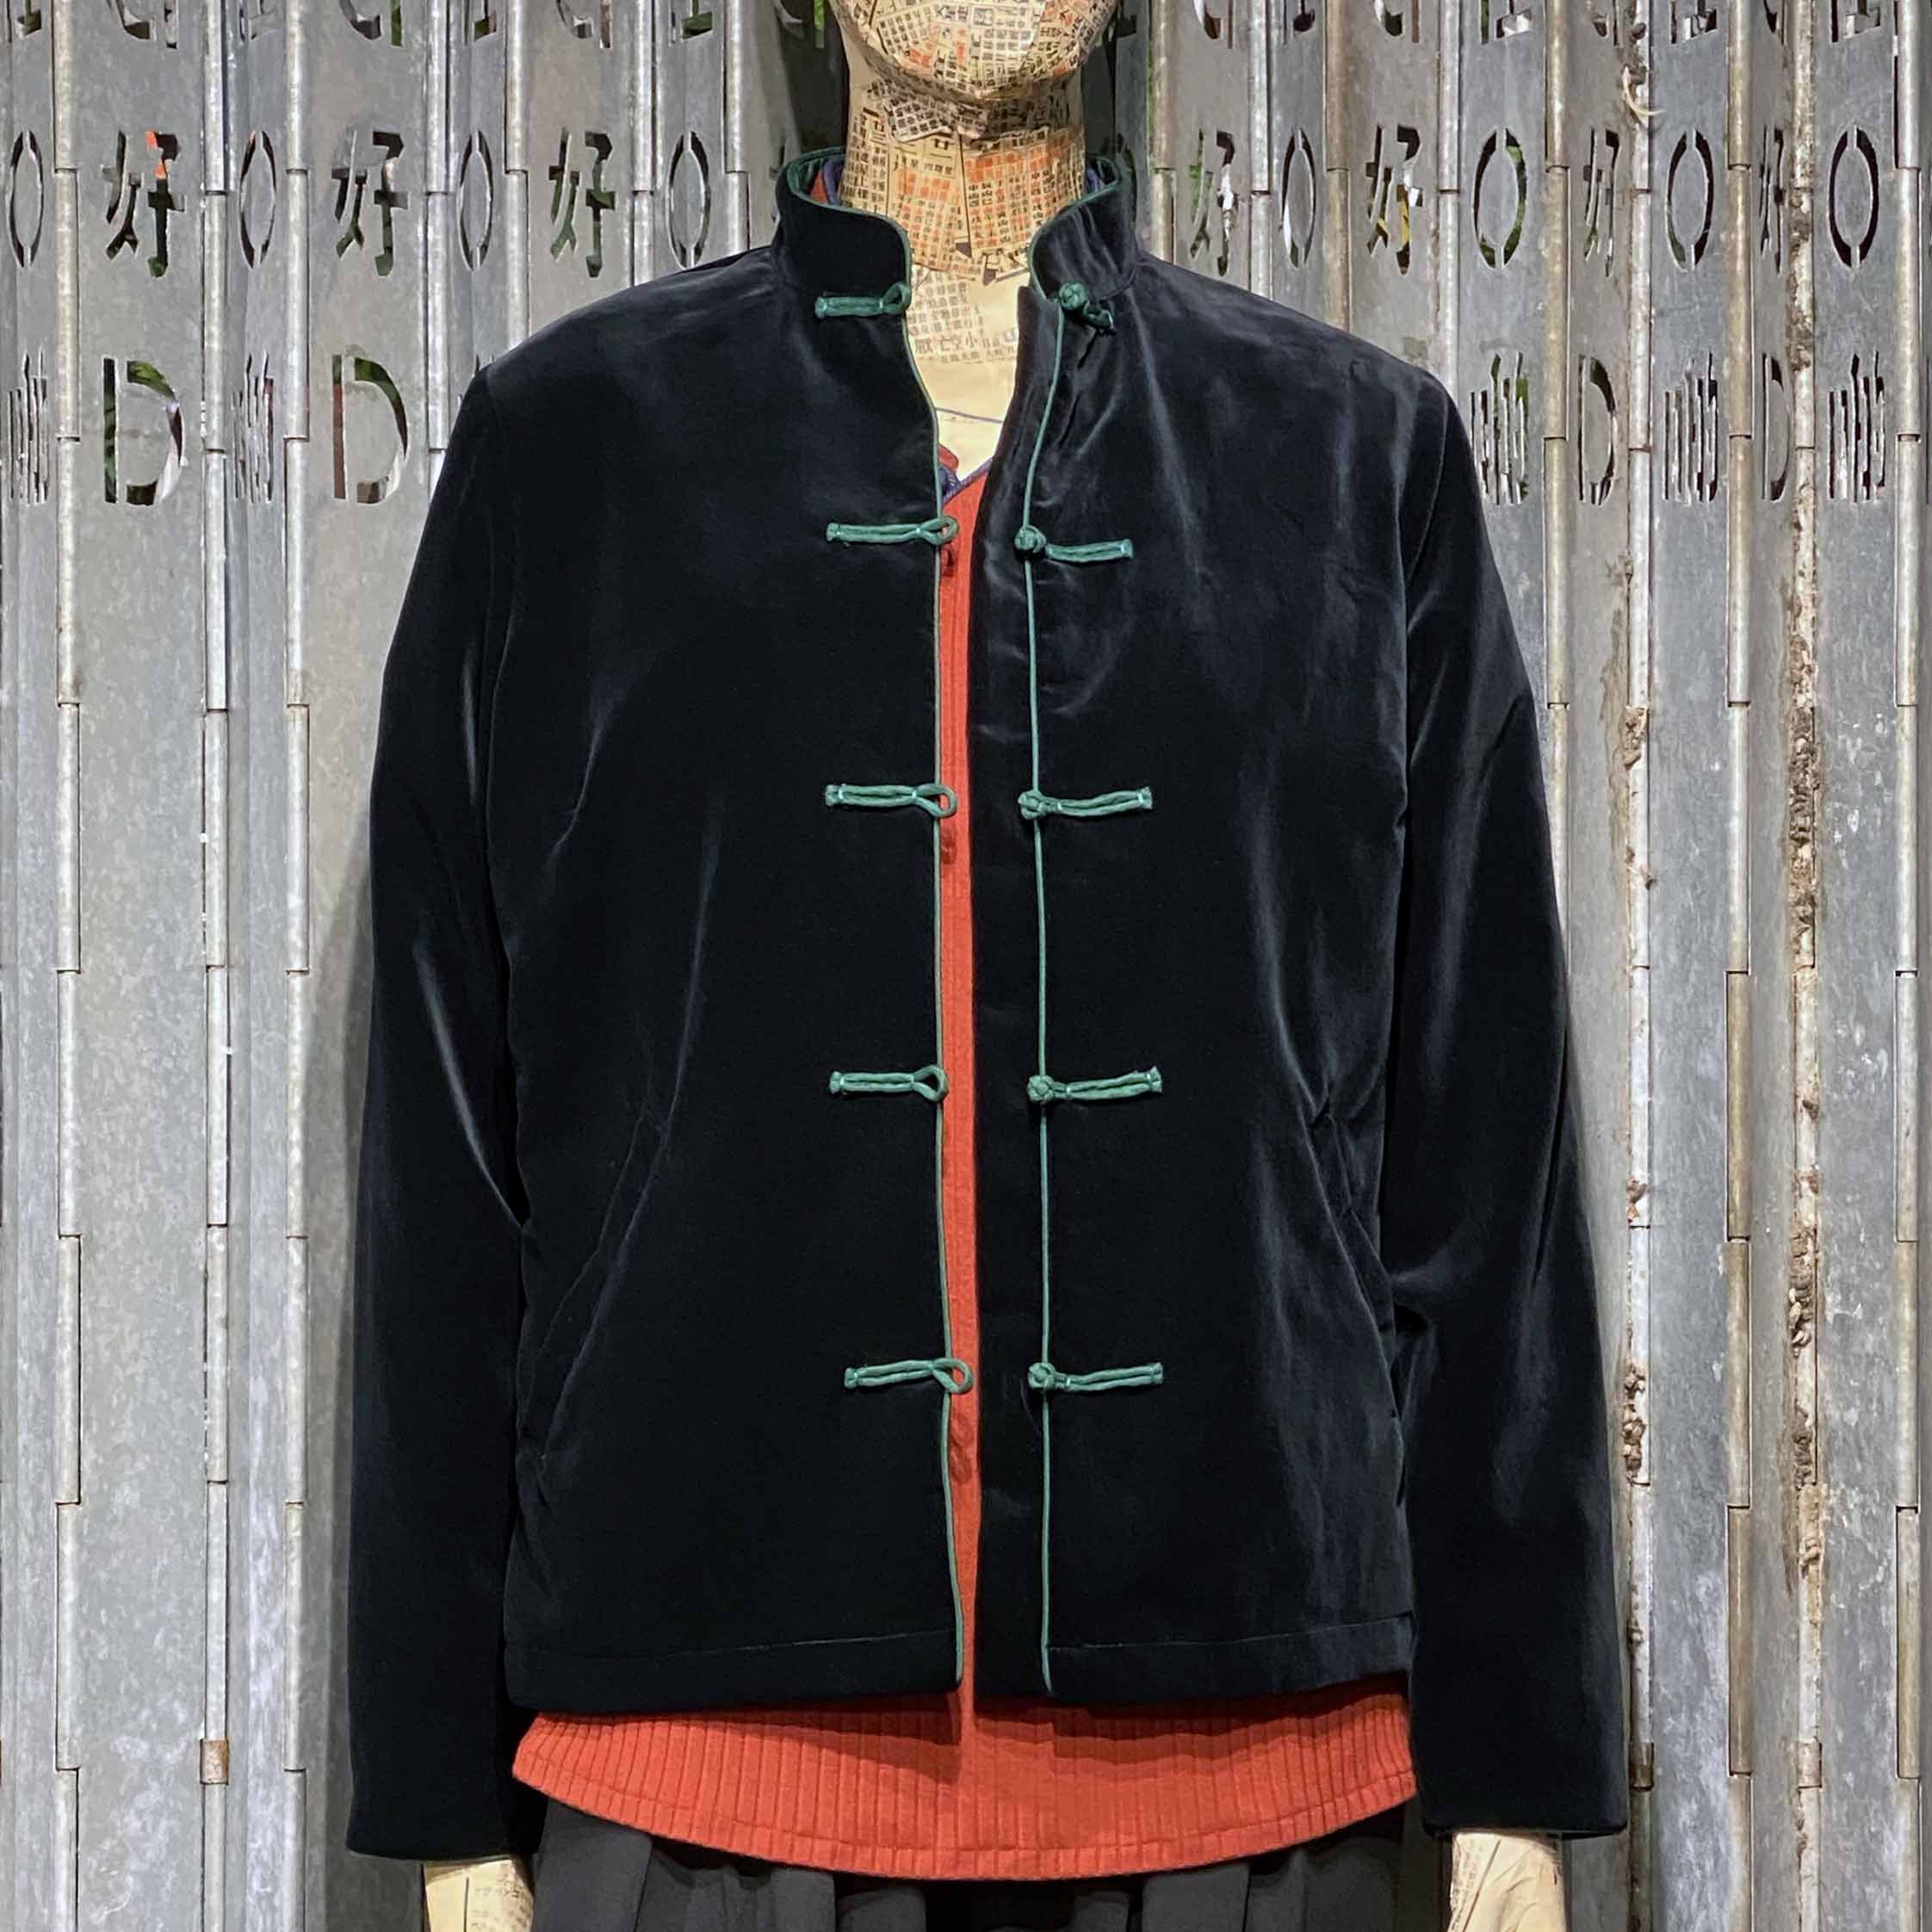 Velvet Knot Button Jacket, Black with Green